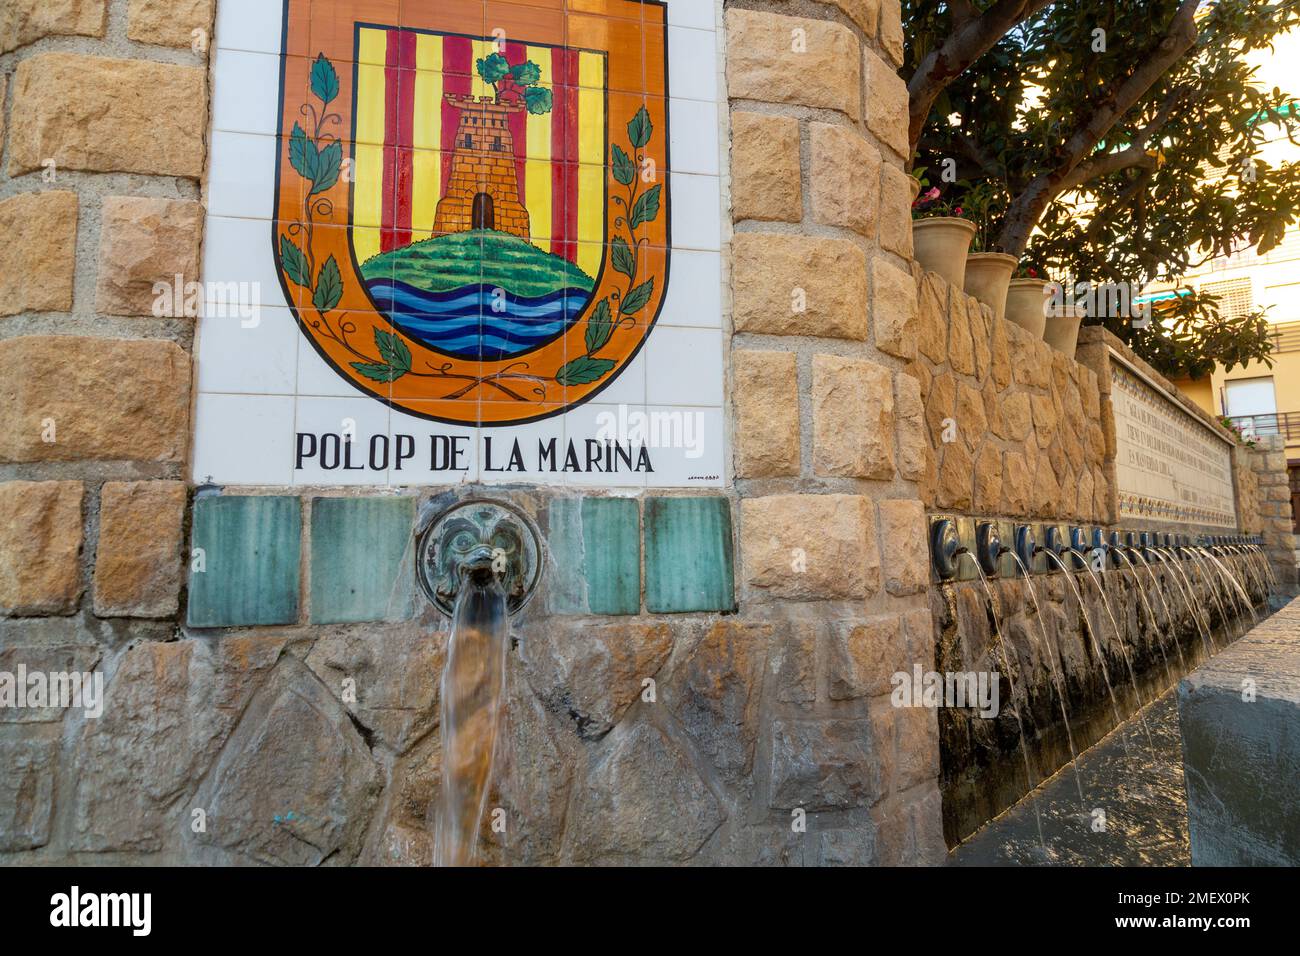 Some of the 221 pipes of the Fuente de los Chorros (Fountain of the Jets), situated in the Plaza de los Chorros (Jets’ Square) Polop de la Marina Stock Photo